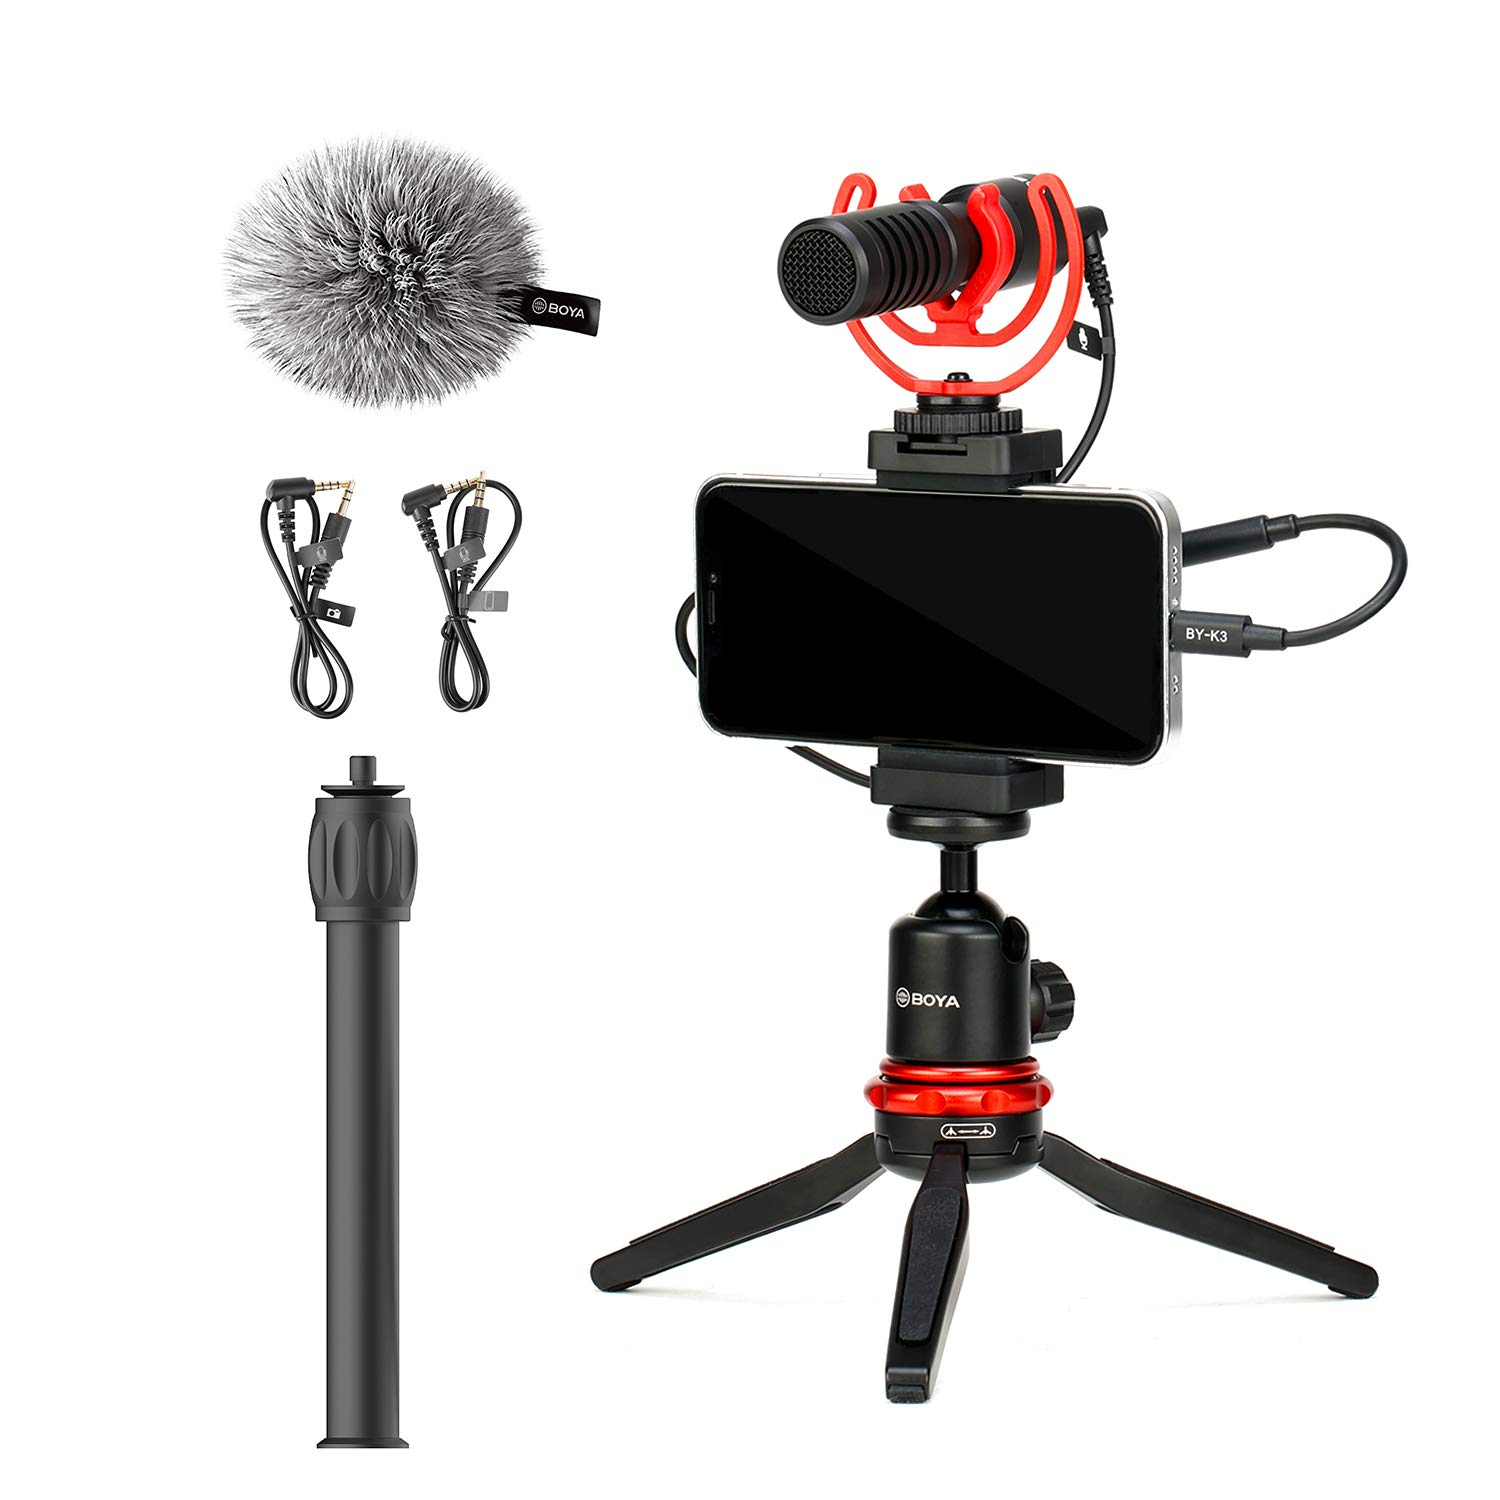 MOURIV VK-T1 Smartphone Video Rig with Mini Tripod, Extension Tube, Video Microphone Compatible with iPhone and Android for YouTube, TIKTok, Vlogging